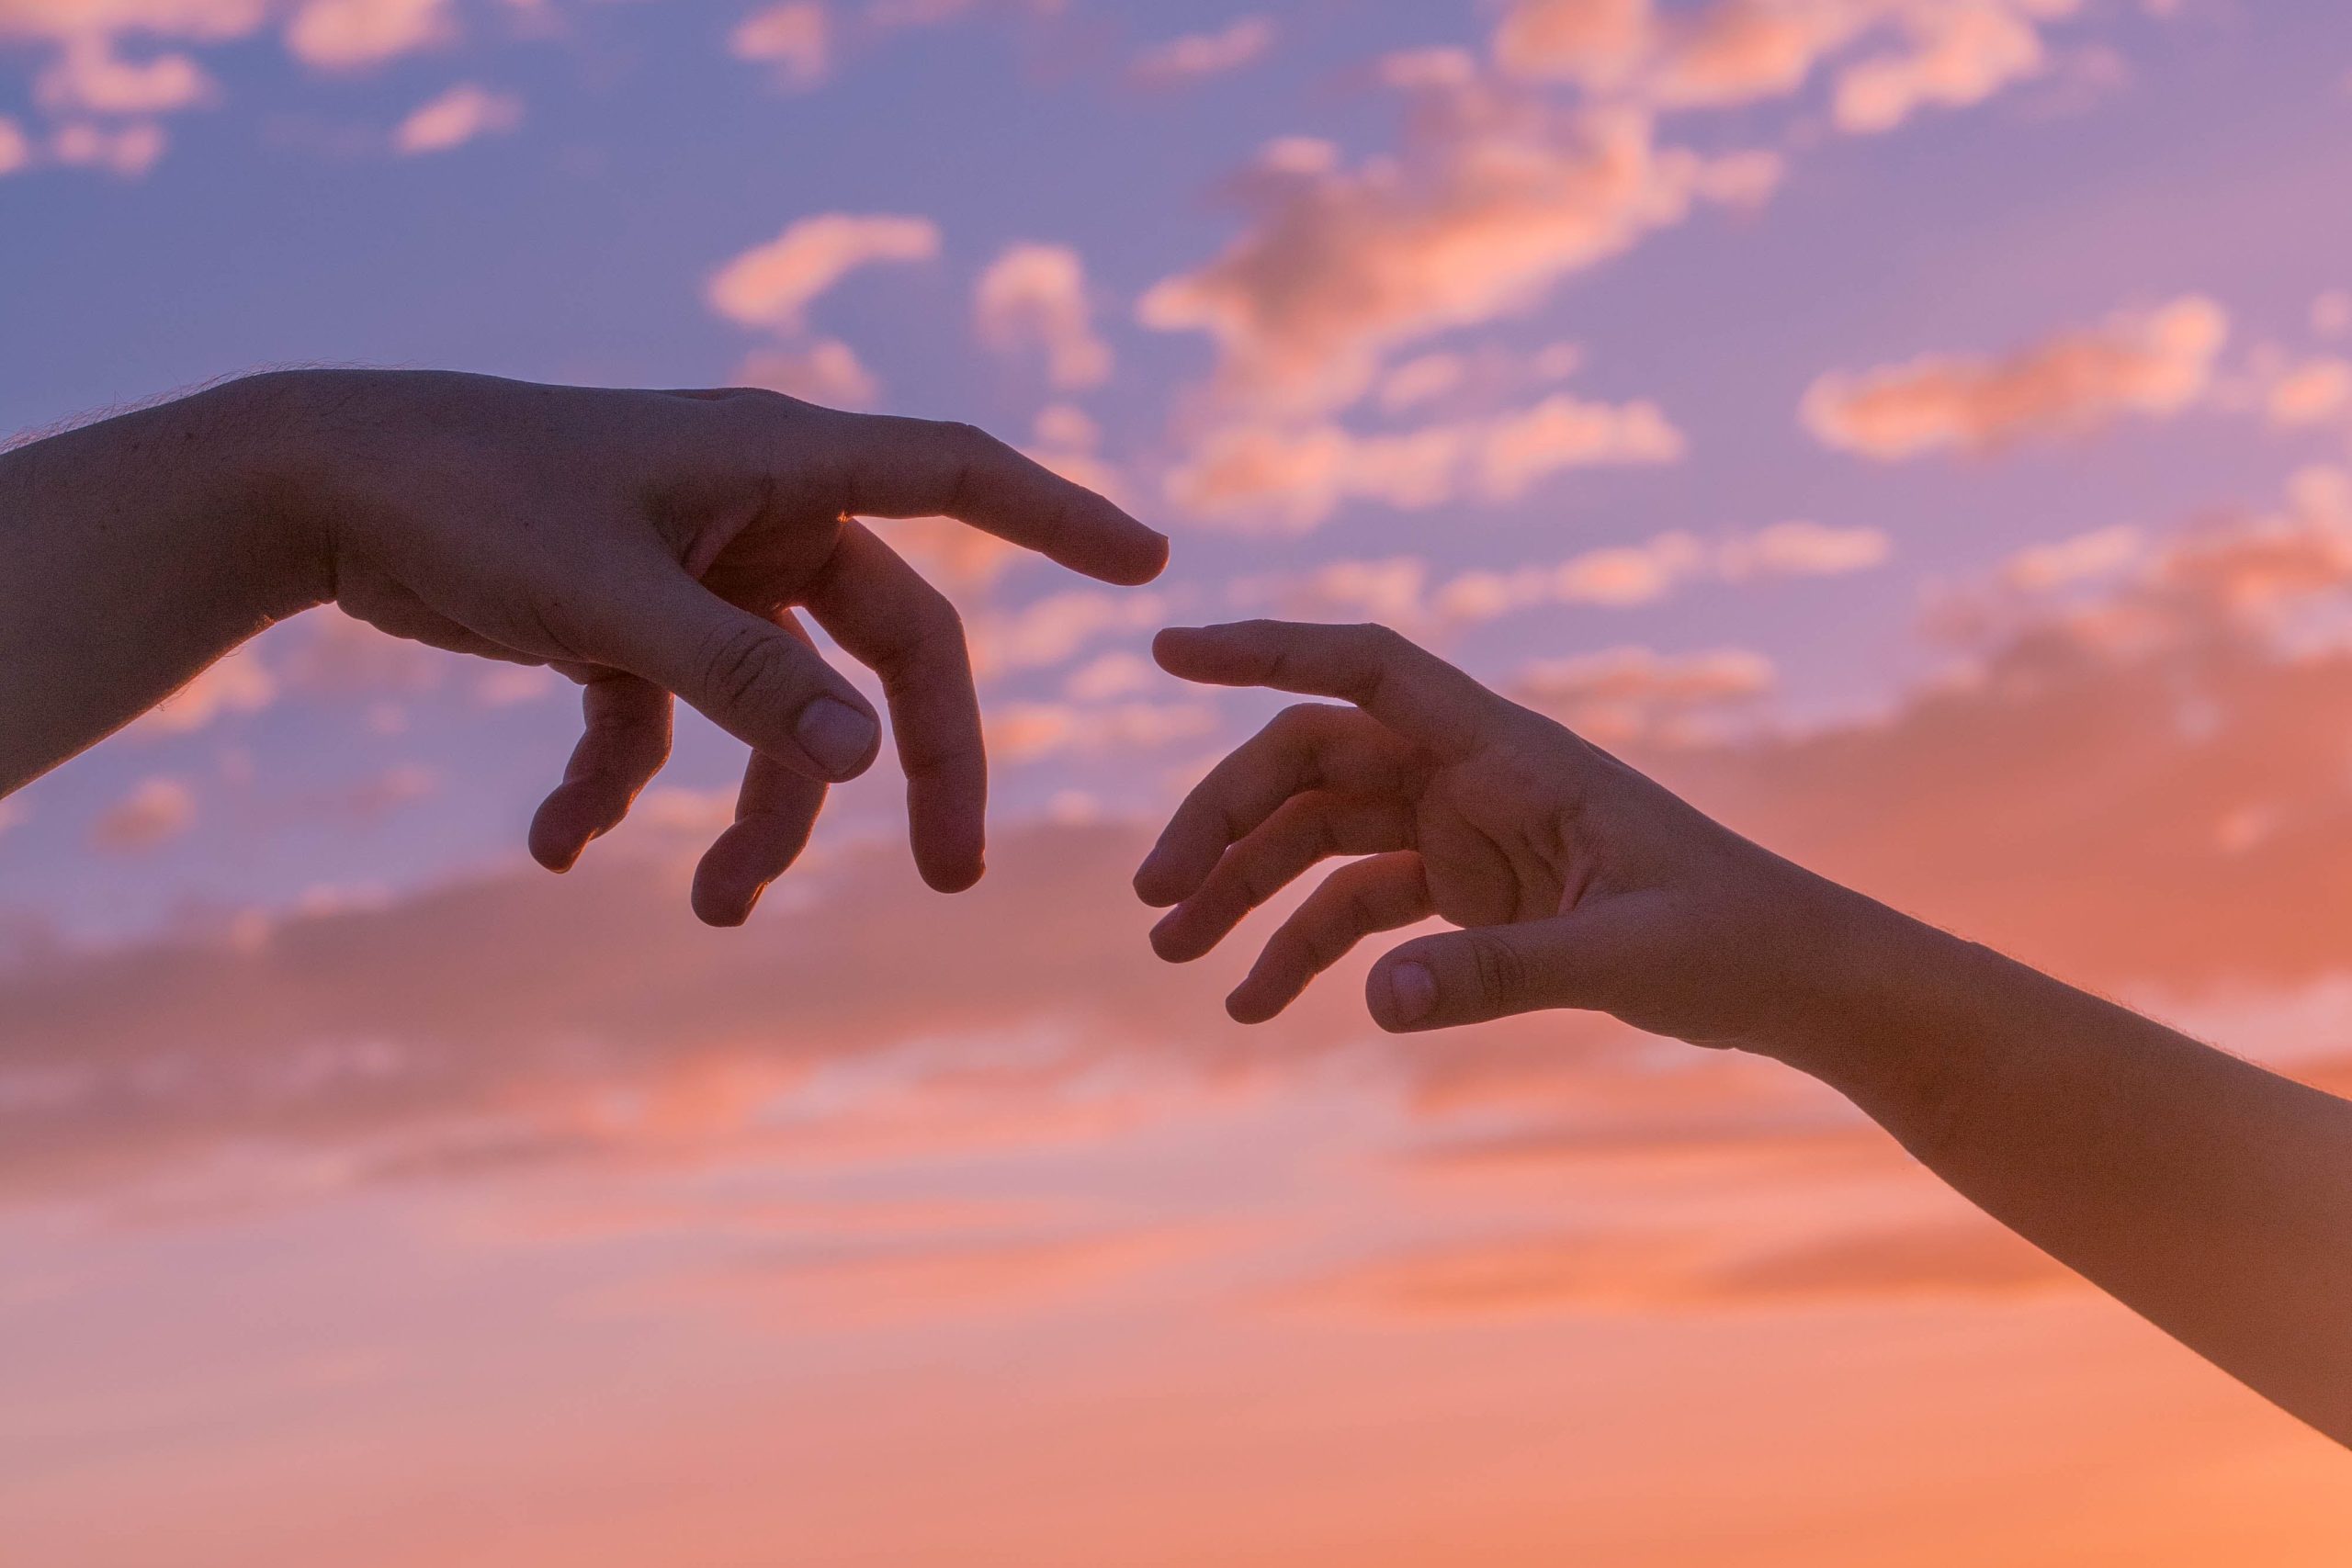 Under the dreamy sky, boys and girls stretched out their tentative hands that were about to touch each other.